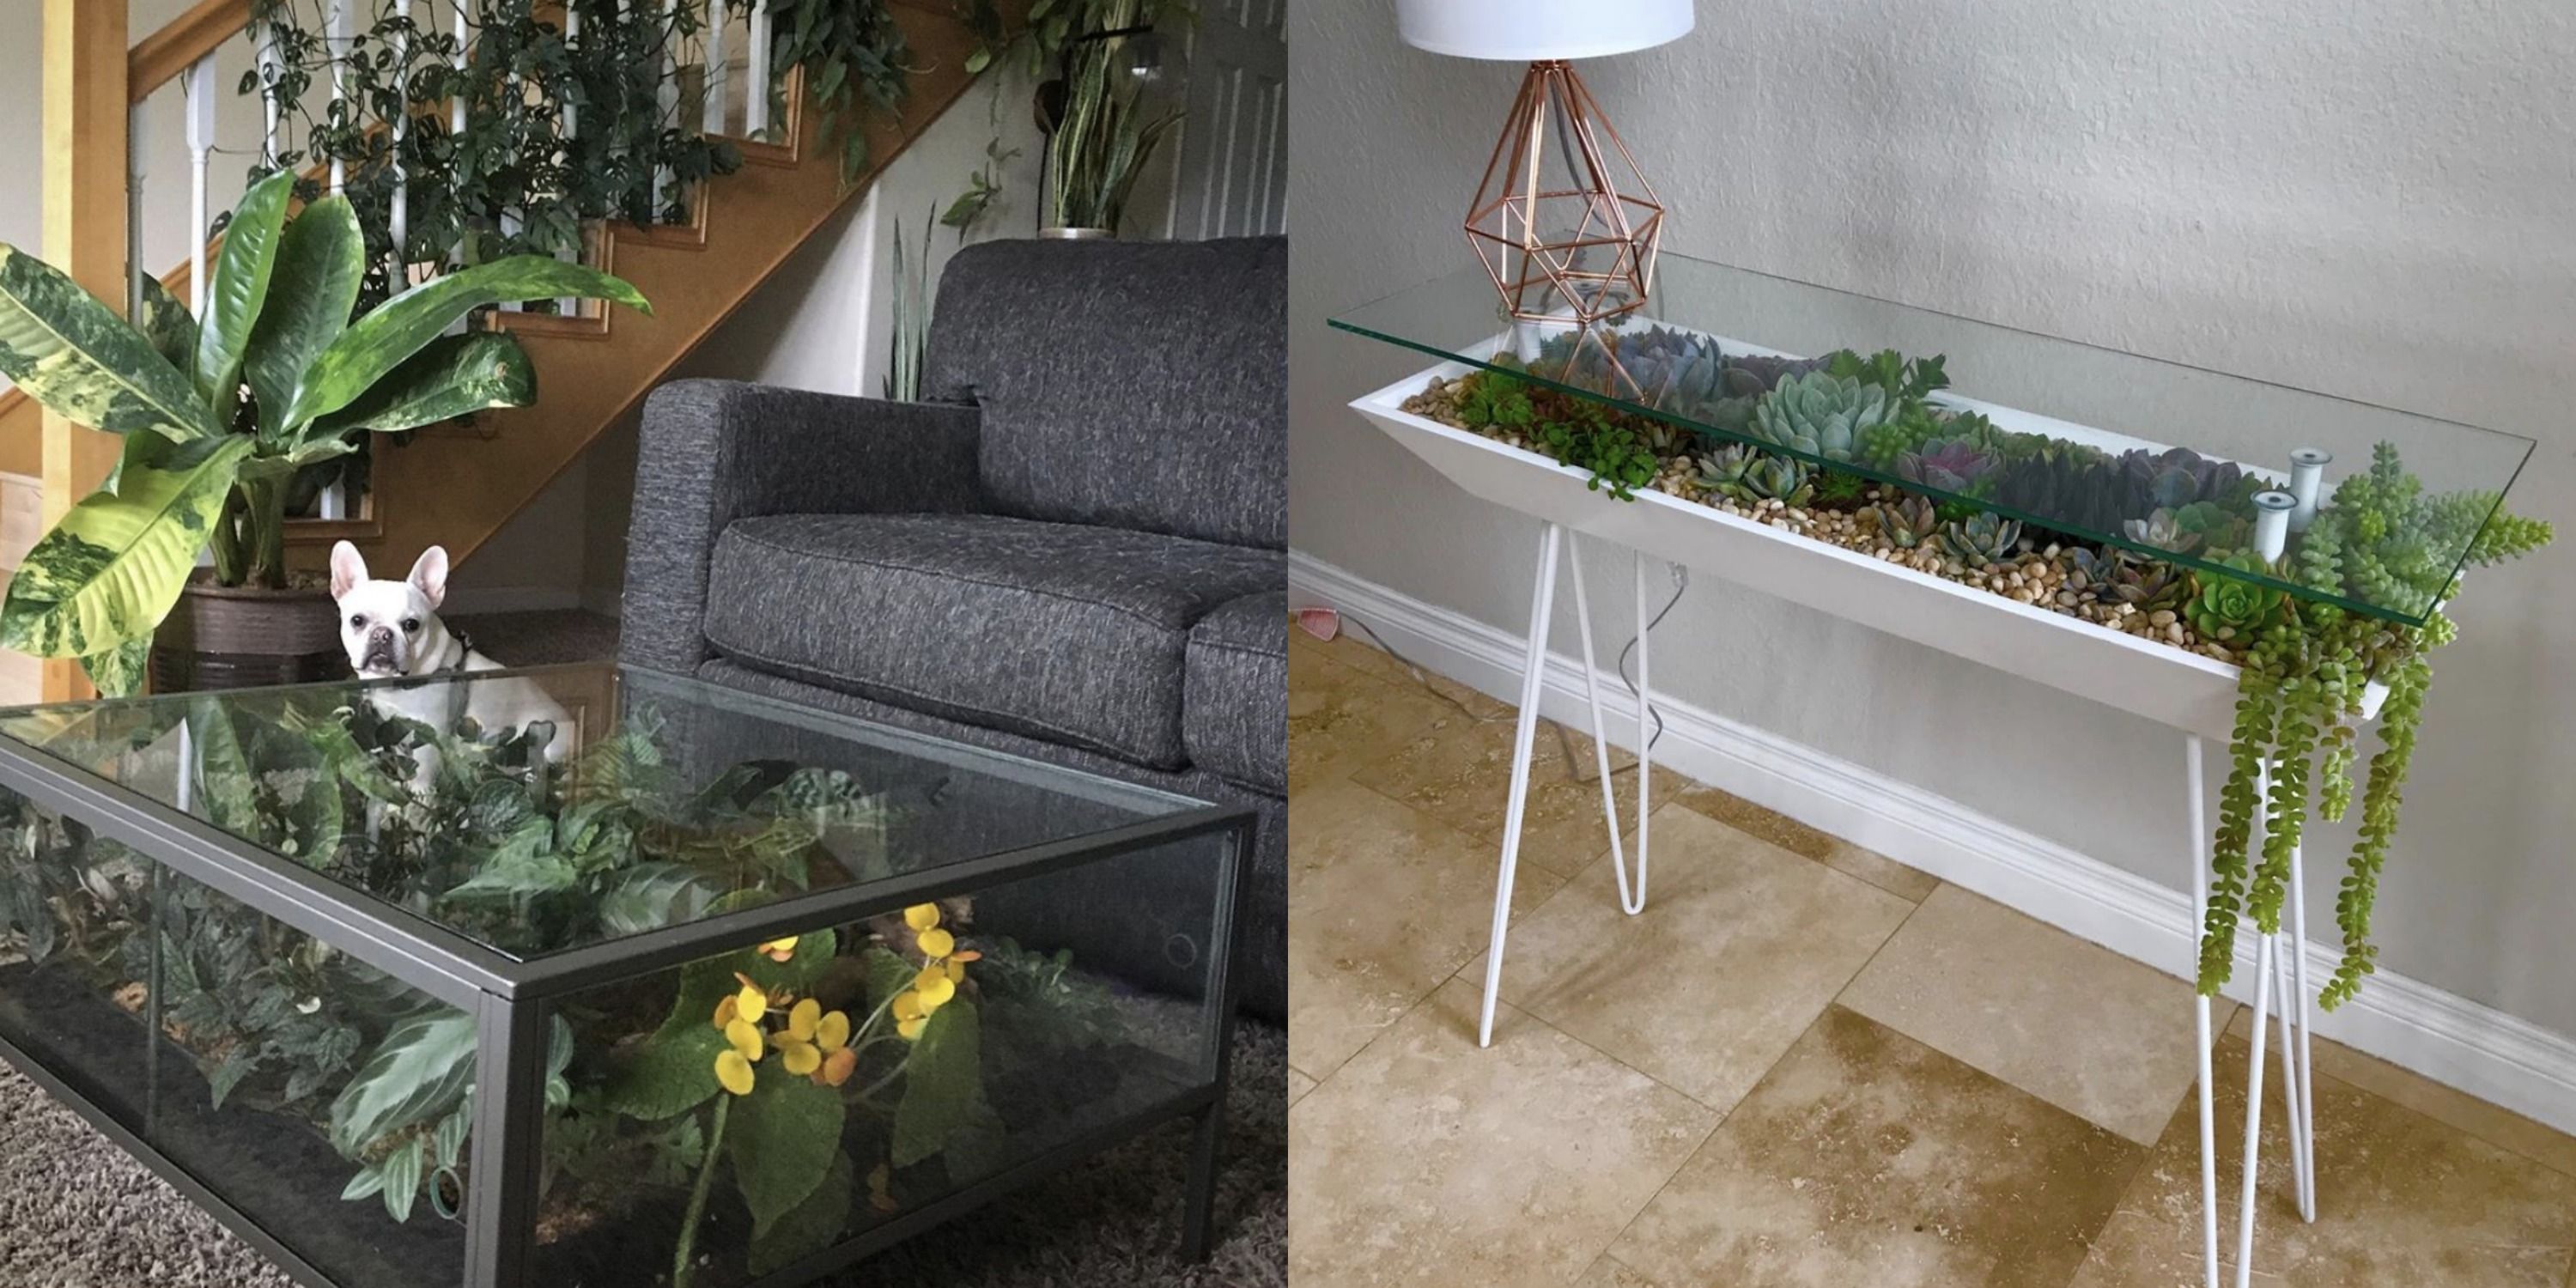 Dining room terrarium tables are innovative and visually